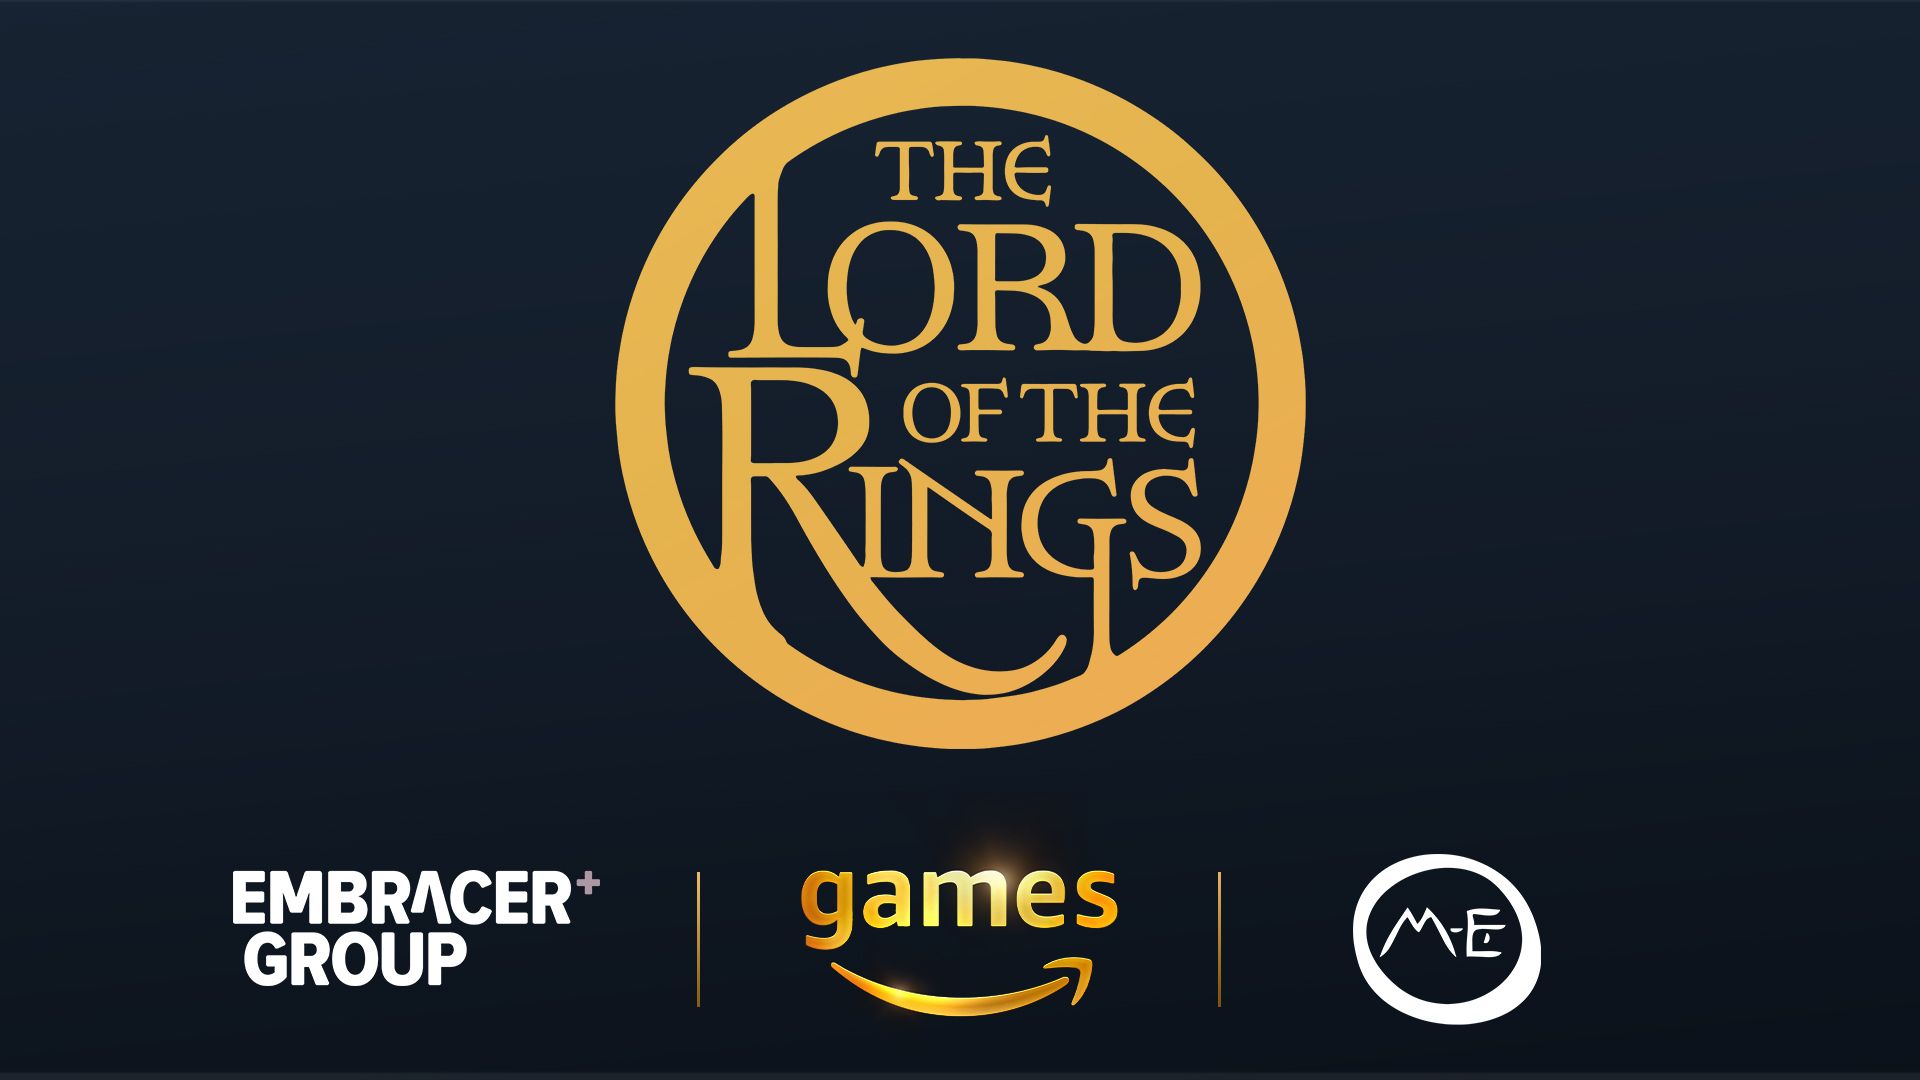 A logo for The Lord of the Rings, with the words encased in a golden circle